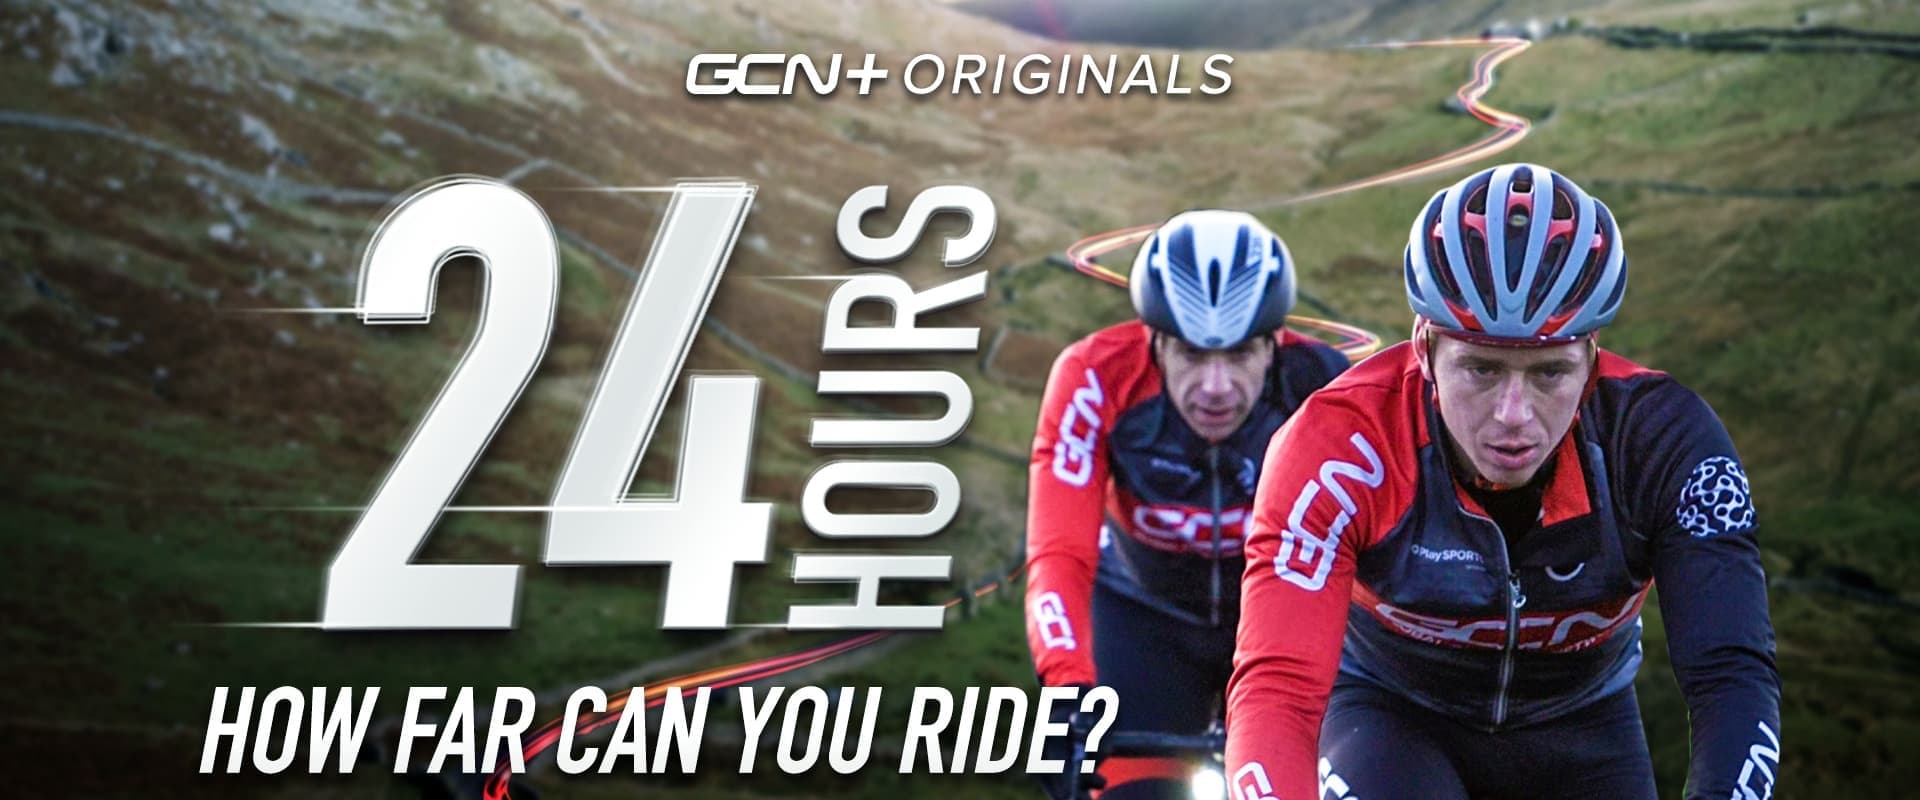 24HRS - How Far Can You Ride A Bike In 24Hrs?